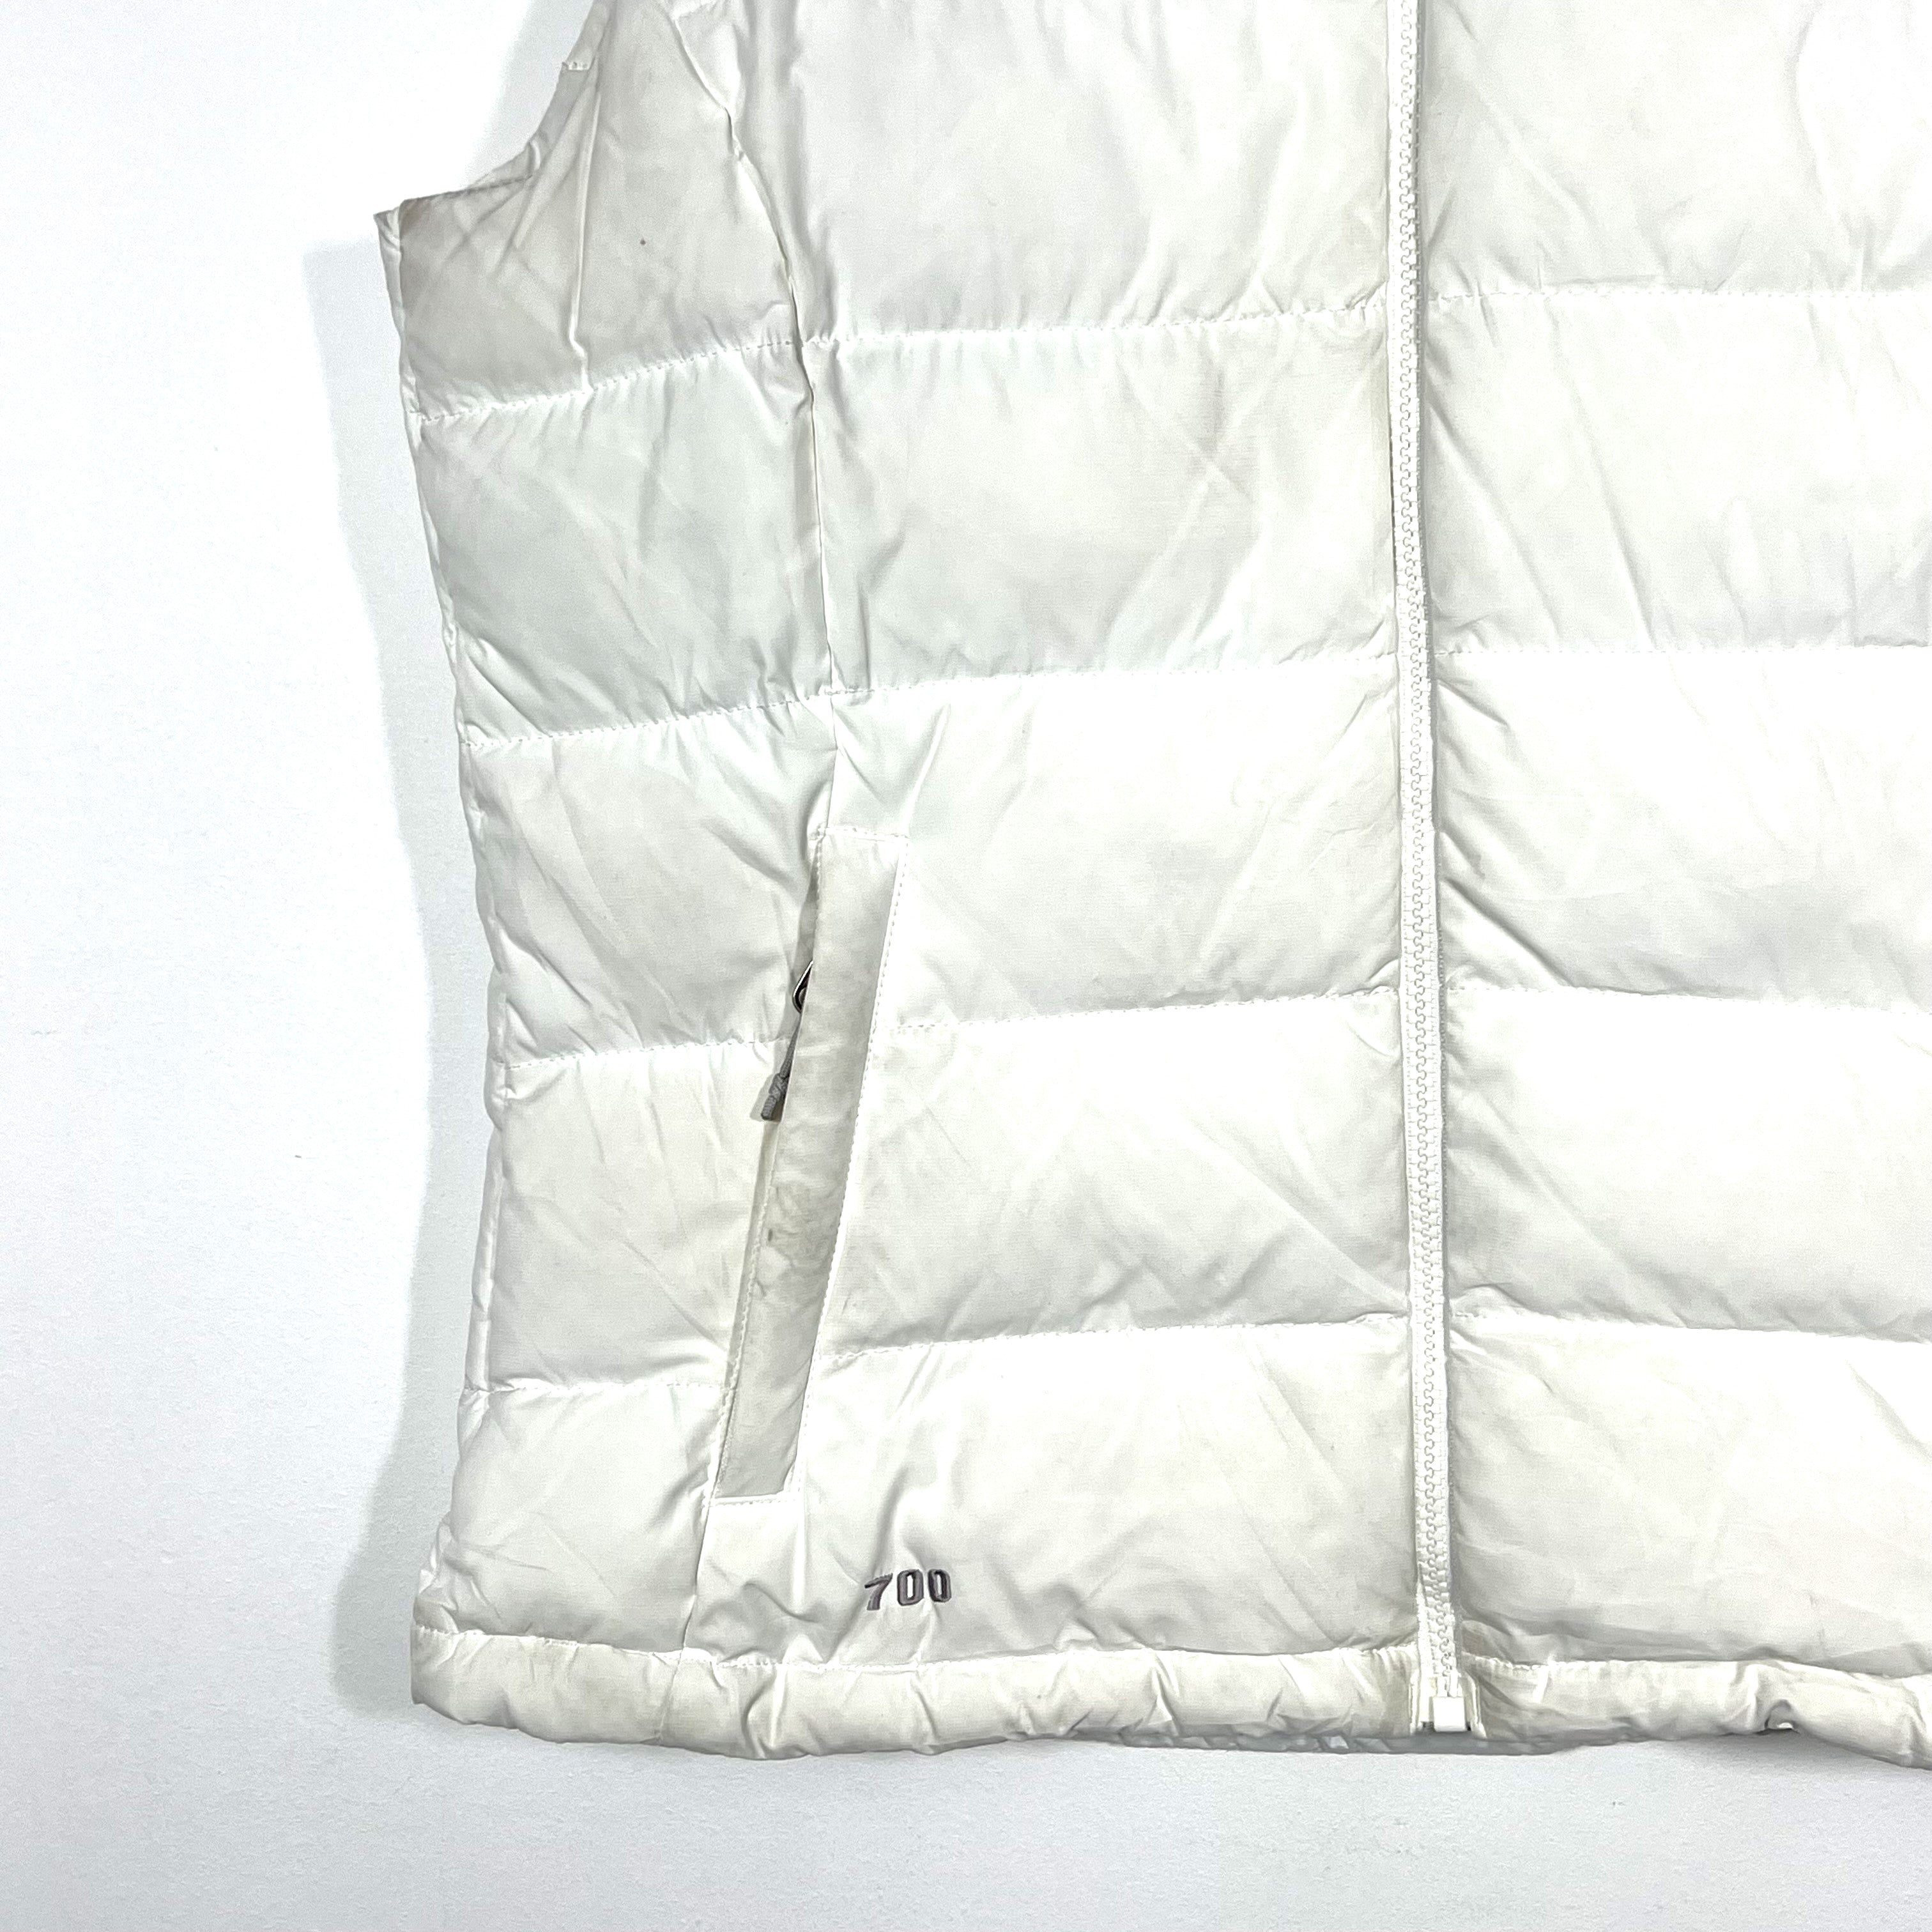 Vintage The North Face 700 Series Insulated Vest - Women's Medium